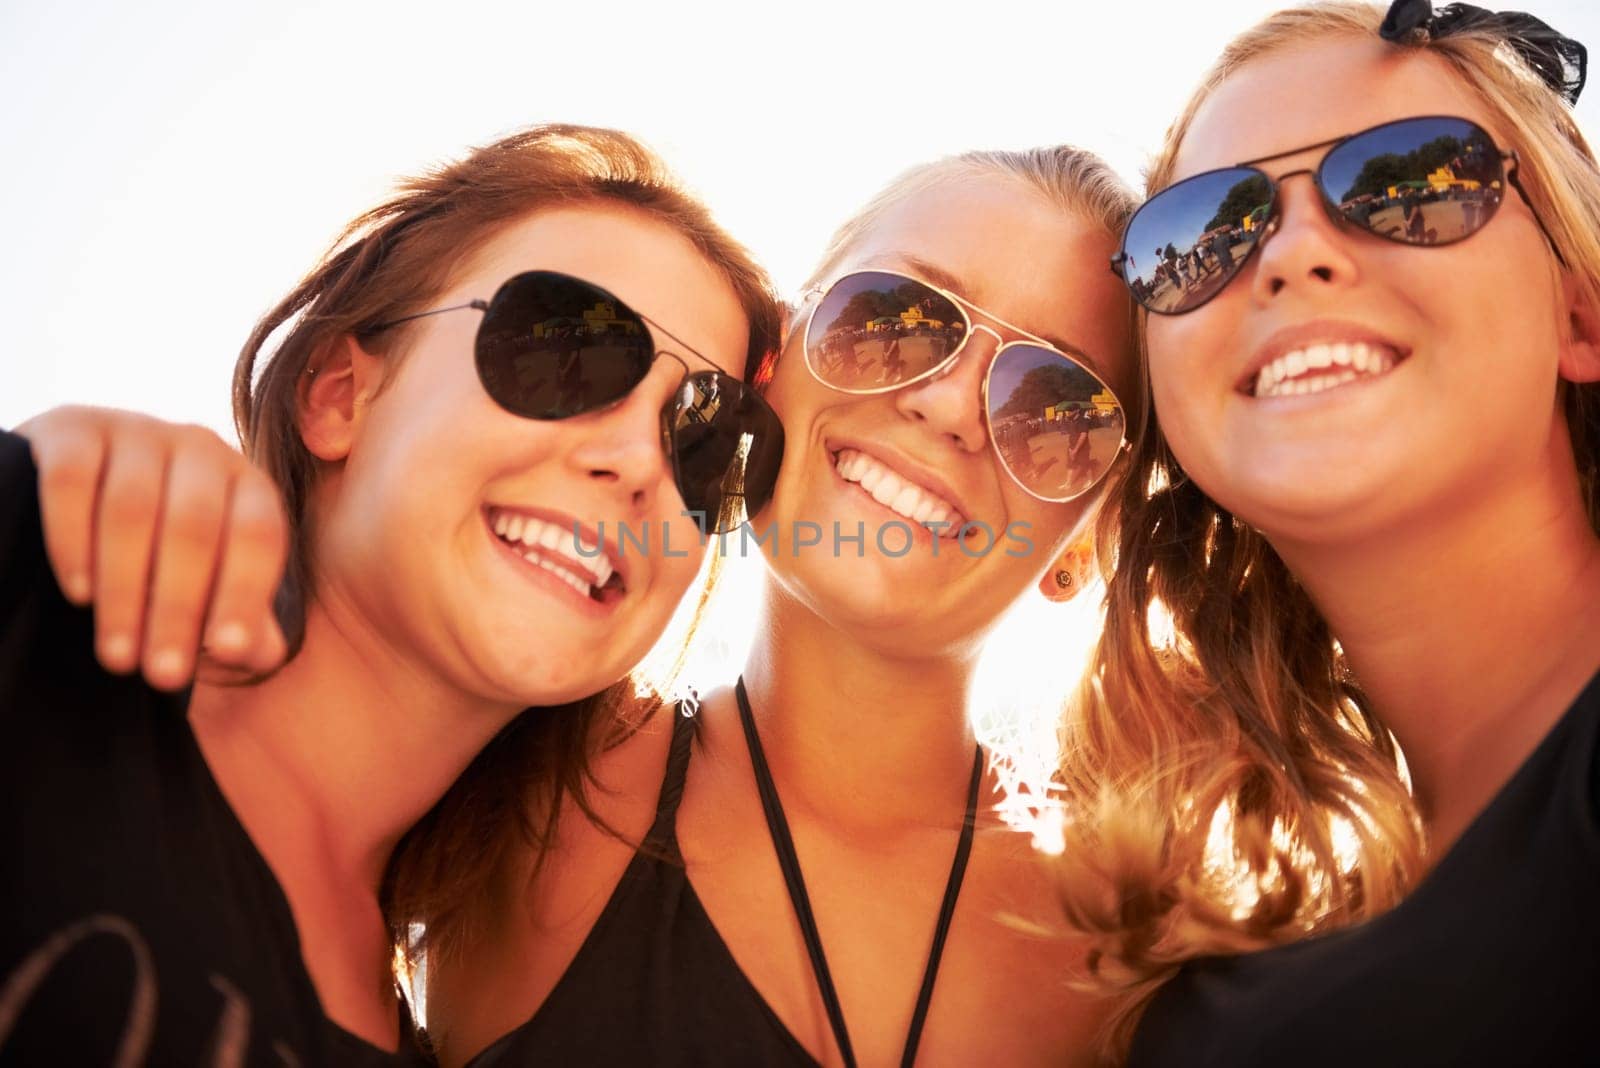 Soaking up the sun. Three friends hugging and smiling against a bright sky